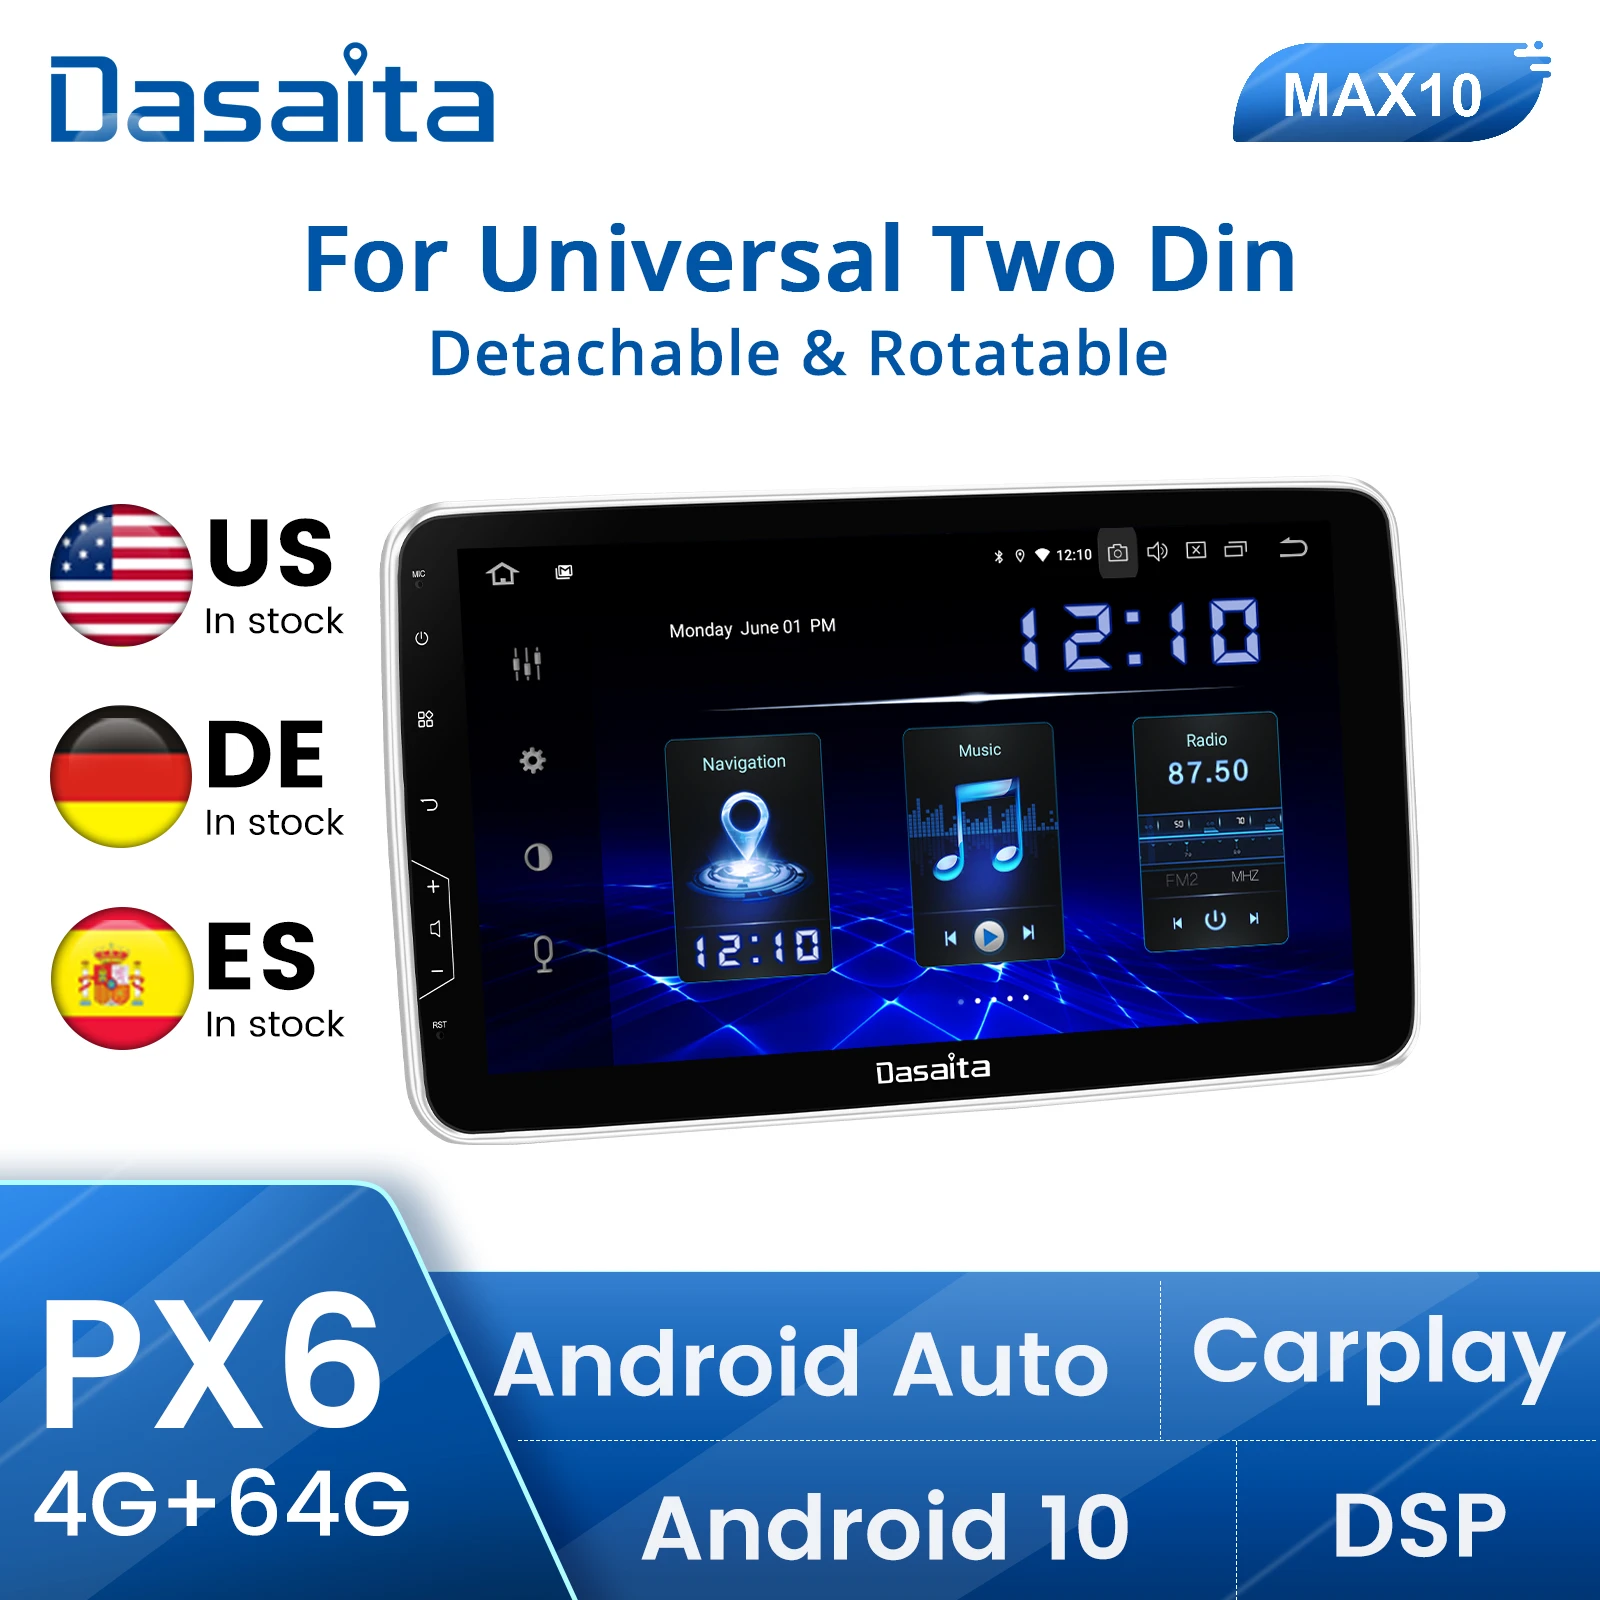 Dasaita 10 inch Rotatable Screen 2din Android 9.0 Car Stereo for Universal Radio GPS DSP System 4G Ram 64G ROM Bluetooth 5.0 15Band EQ Navigation Multimedia